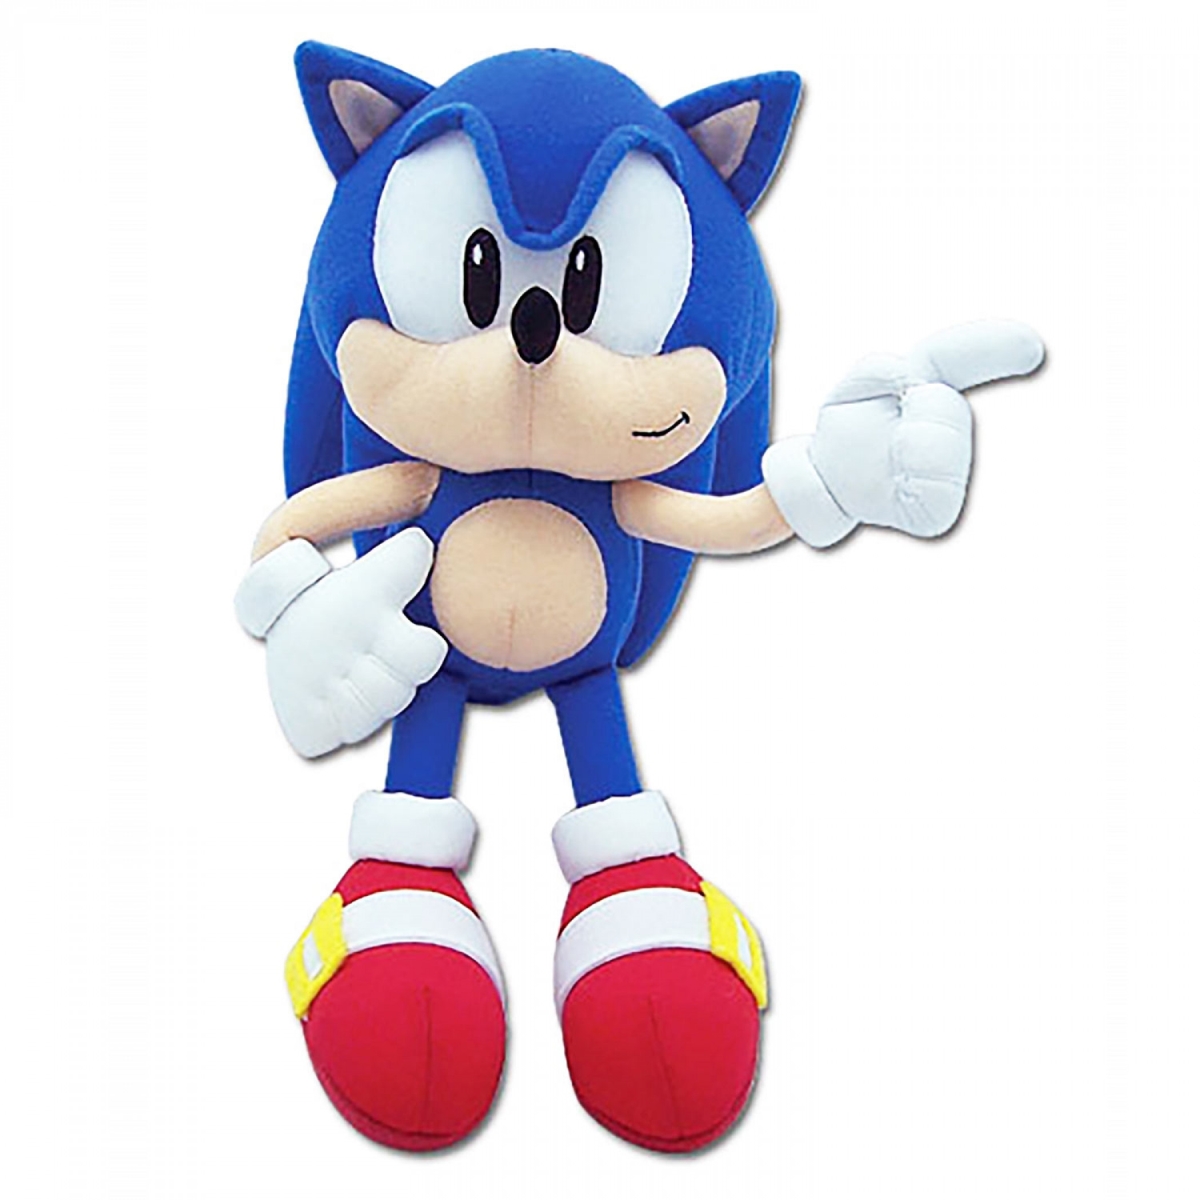 Picture of Sonic 808542 Sonic the Hedgehog Plush Toy